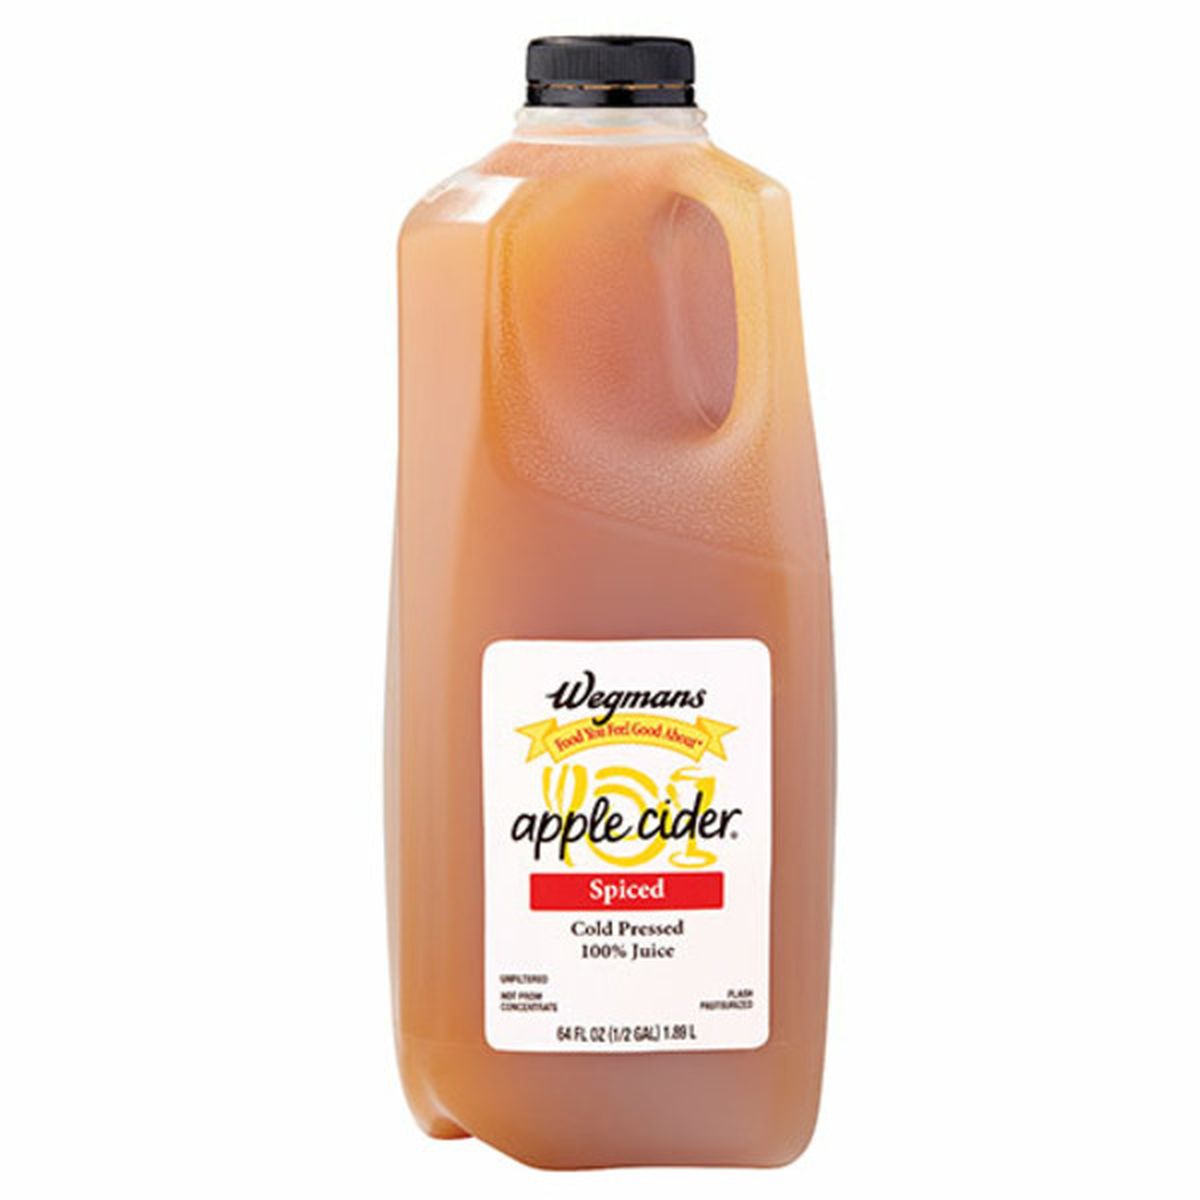 Calories in Wegmans Cold Pressed 100% Juice, Spiced Apple Cider